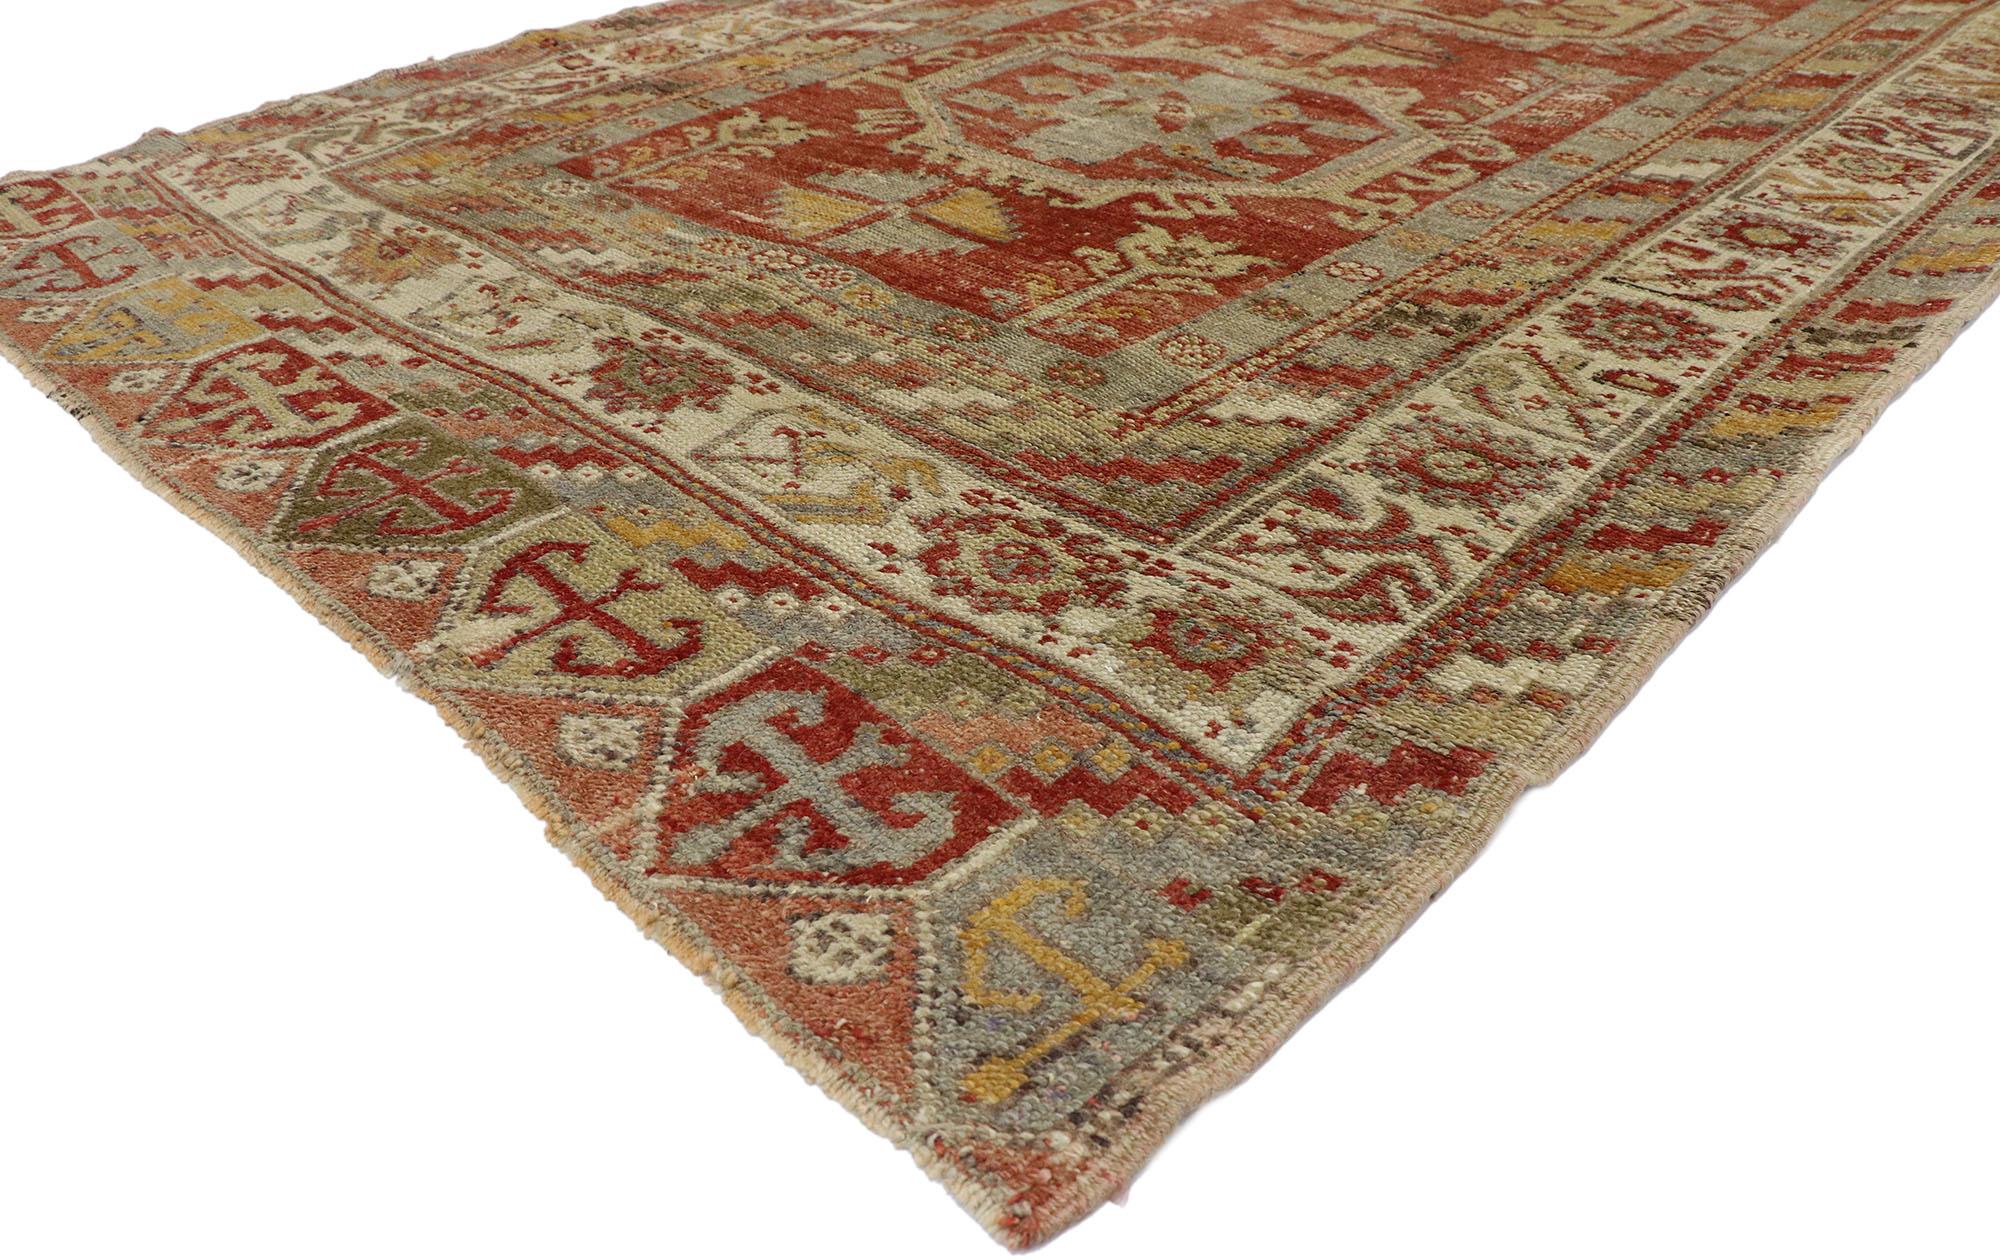 50912, vintage Turkish Oushak Gallery rug with Modern Tribal style, wide hallway runner. Warm and inviting with tribal charm, this hand knotted wool vintage Turkish Oushak gallery rug embodies Mid-Century Modern style with tribal vibes. The abrashed